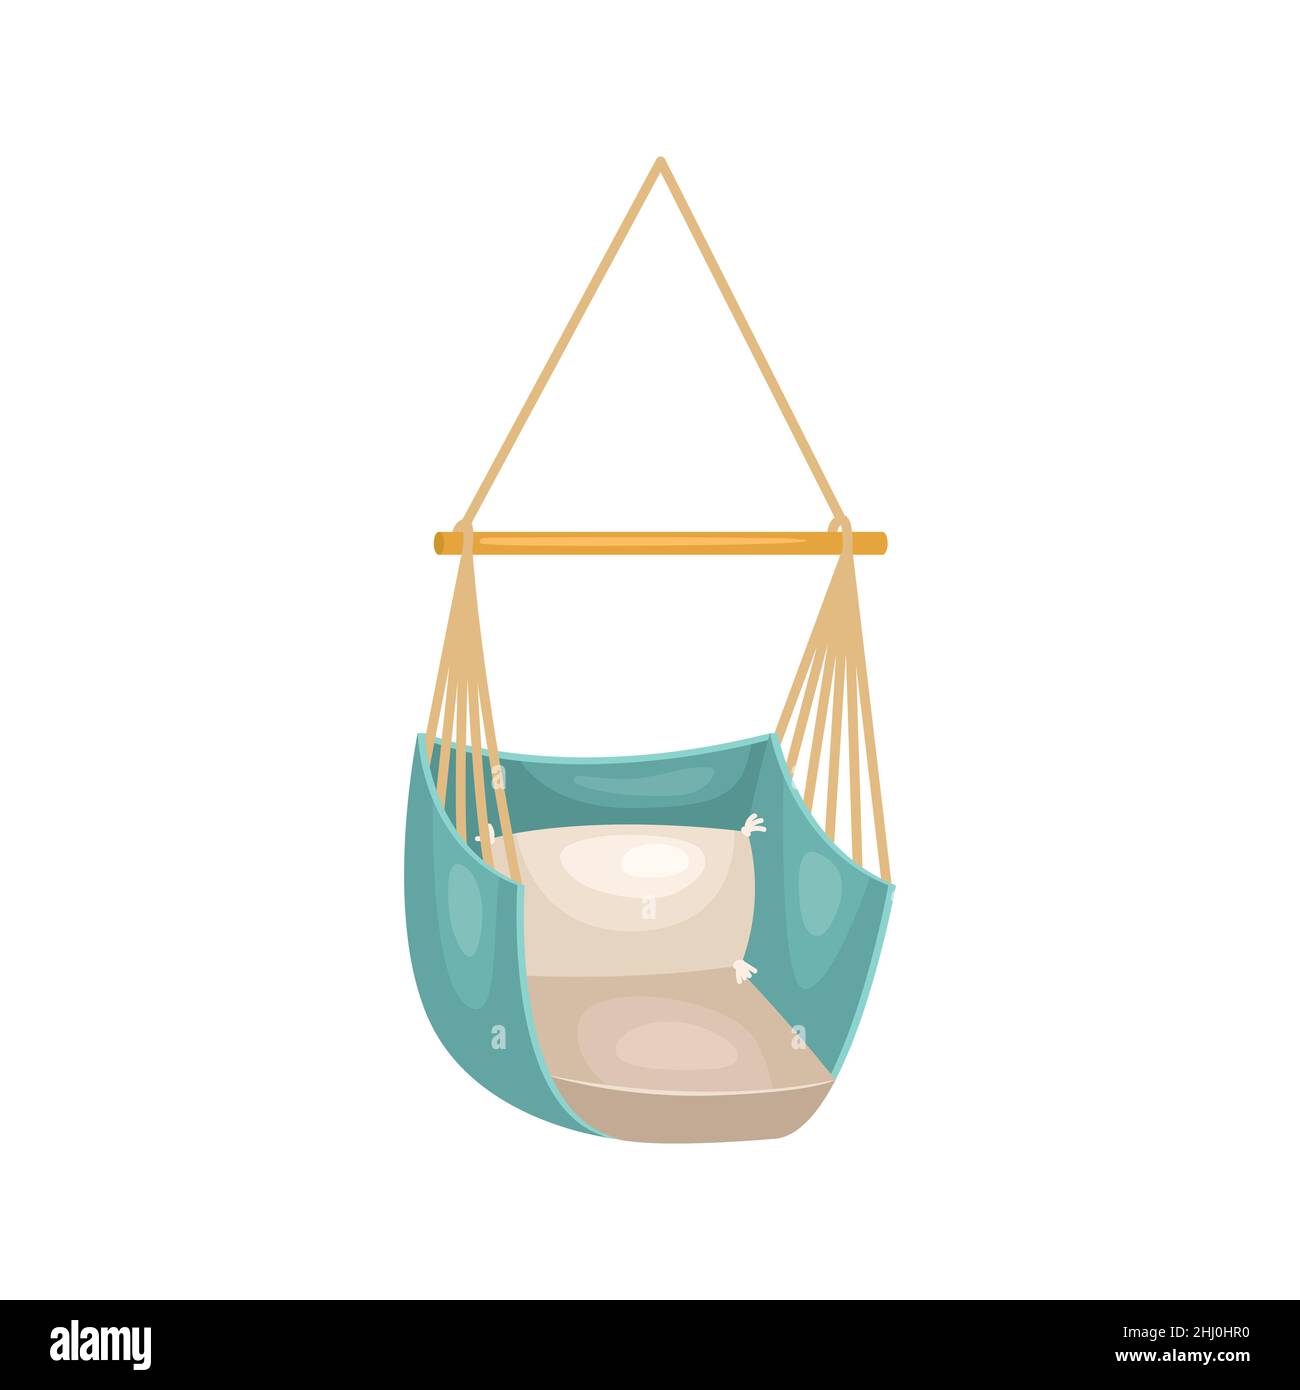 Vector illustration of a hammock in the form of an armchair. Stock Vector